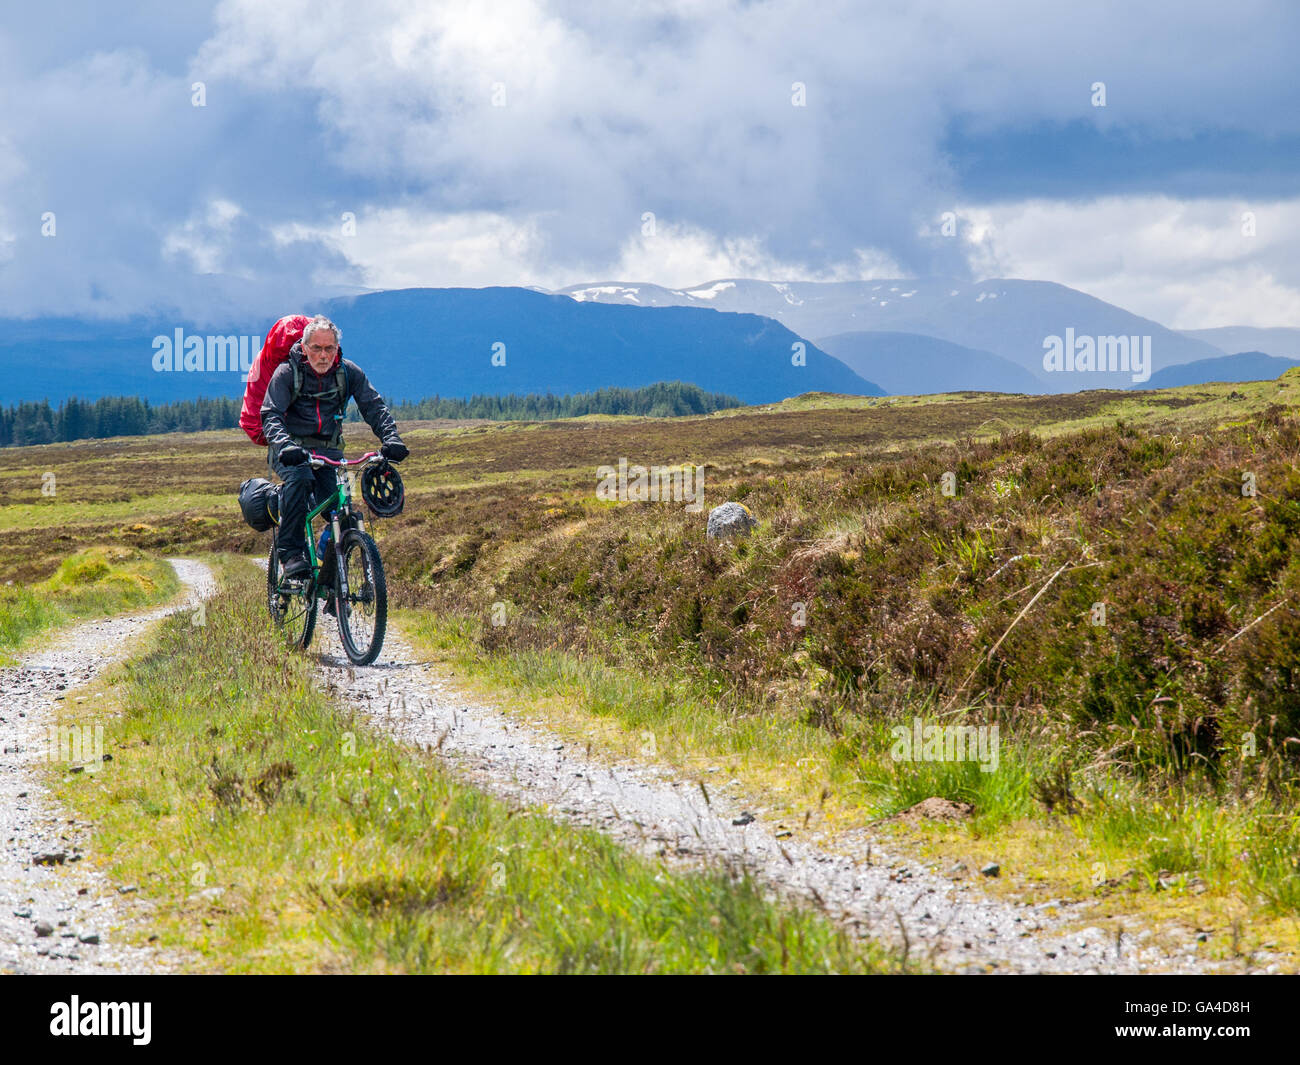 Retired man on a bike-packing ride through the Scottish Highlands Stock Photo